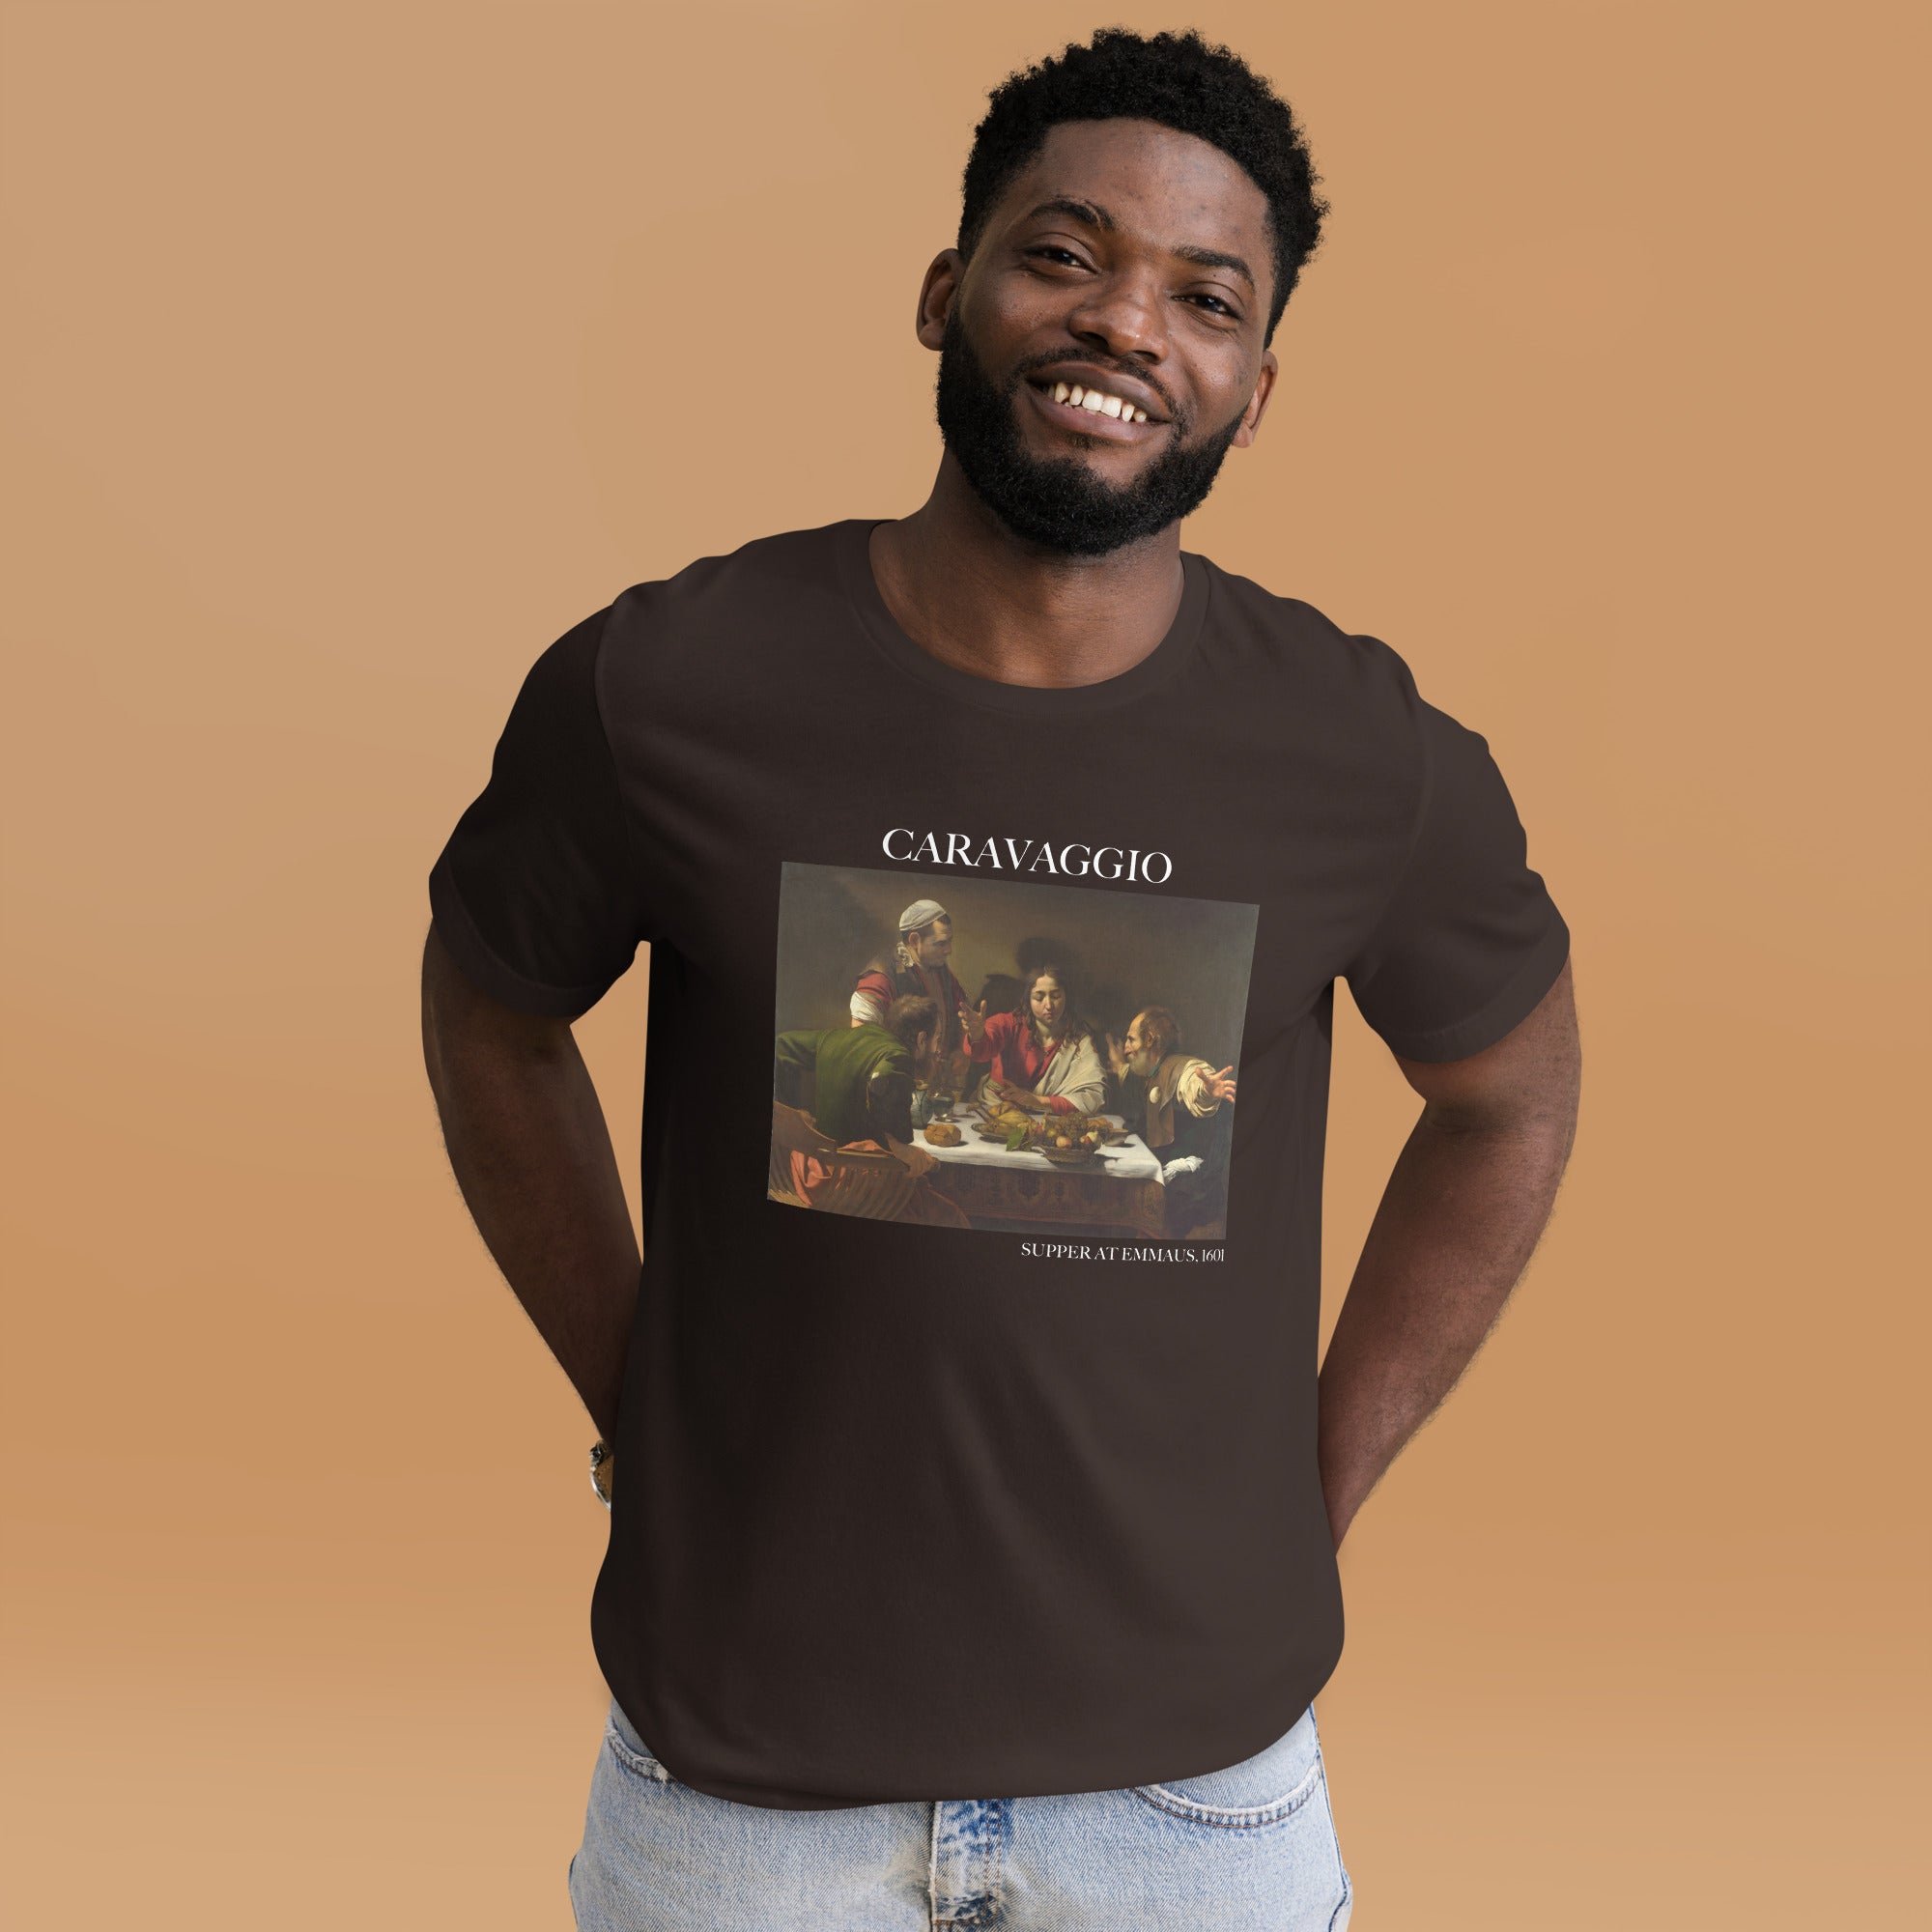 Caravaggio 'Supper at Emmaus' Famous Painting T-Shirt | Unisex Classic Art Tee